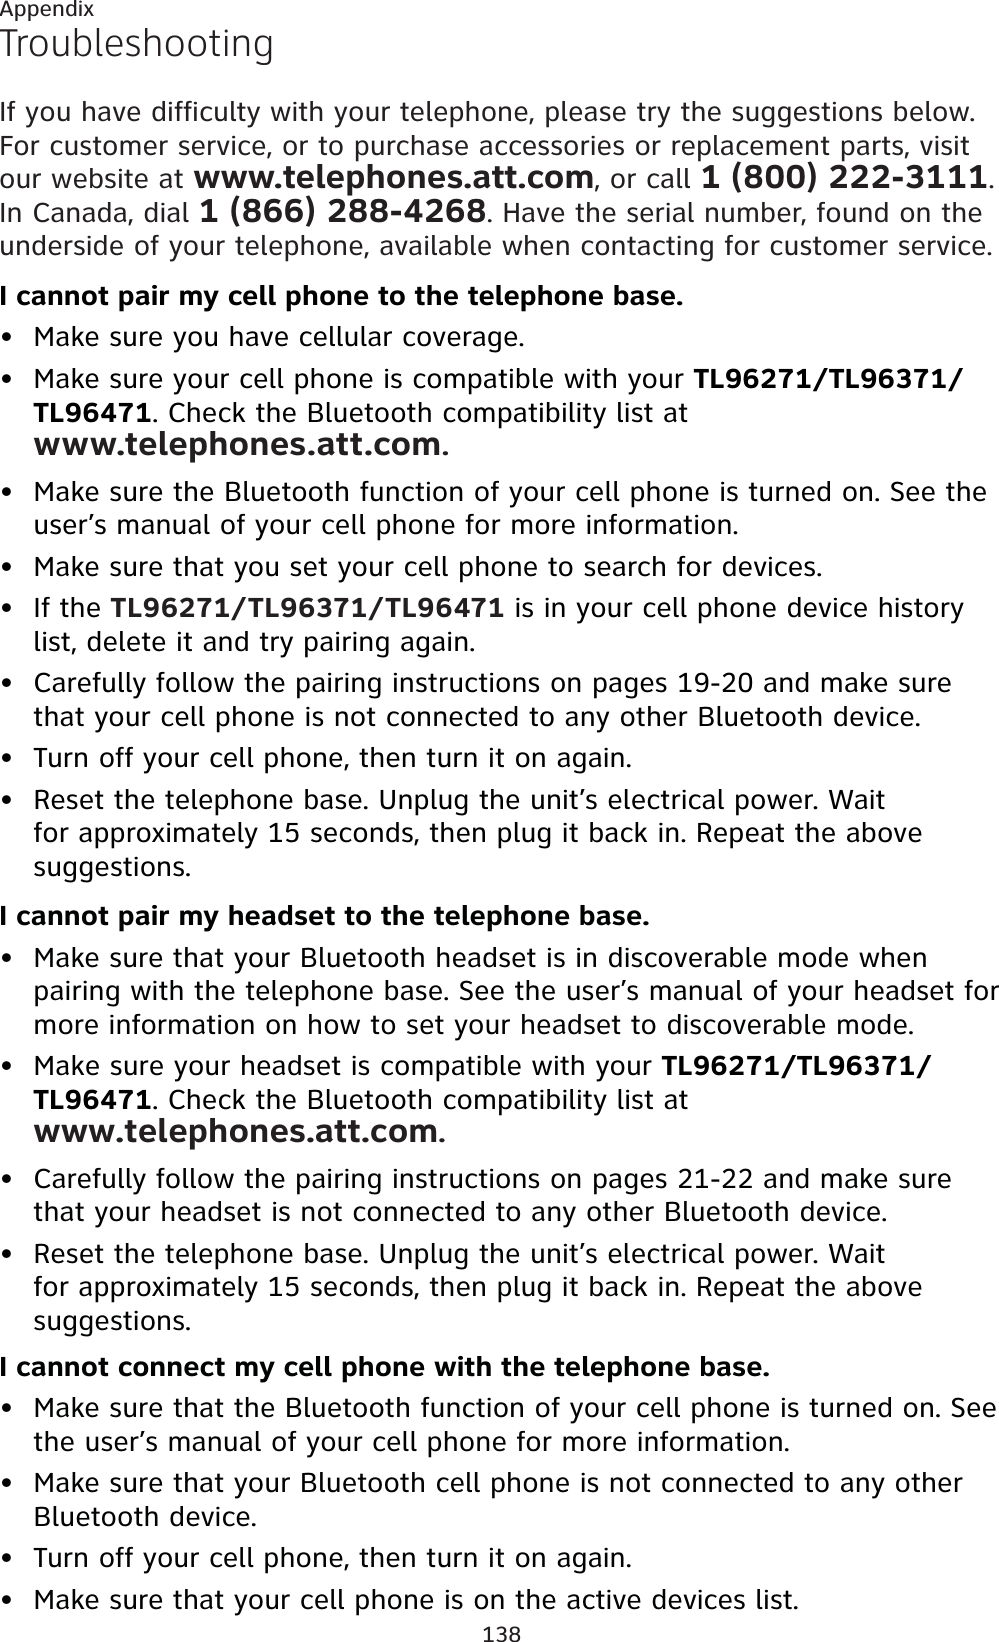 138AppendixTroubleshootingIf you have difficulty with your telephone, please try the suggestions below. For customer service, or to purchase accessories or replacement parts, visit our website at www.telephones.att.com, or call 1 (800) 222-3111.In Canada, dial 1 (866) 288-4268. Have the serial number, found on the underside of your telephone, available when contacting for customer service.I cannot pair my cell phone to the telephone base.Make sure you have cellular coverage.Make sure your cell phone is compatible with your TL96271/TL96371/TL96471. Check the Bluetooth compatibility list at www.telephones.att.com.Make sure the Bluetooth function of your cell phone is turned on. See the user’s manual of your cell phone for more information.Make sure that you set your cell phone to search for devices.If the TL96271/TL96371/TL96471 is in your cell phone device history list, delete it and try pairing again.Carefully follow the pairing instructions on pages 19-20 and make sure that your cell phone is not connected to any other Bluetooth device.Turn off your cell phone, then turn it on again.Reset the telephone base. Unplug the unit’s electrical power. Wait for approximately 15 seconds, then plug it back in. Repeat the above suggestions.I cannot pair my headset to the telephone base.Make sure that your Bluetooth headset is in discoverable mode when pairing with the telephone base. See the user’s manual of your headset for more information on how to set your headset to discoverable mode.Make sure your headset is compatible with your TL96271/TL96371/TL96471. Check the Bluetooth compatibility list at www.telephones.att.com.Carefully follow the pairing instructions on pages 21-22 and make sure that your headset is not connected to any other Bluetooth device.Reset the telephone base. Unplug the unit’s electrical power. Wait for approximately 15 seconds, then plug it back in. Repeat the above suggestions.I cannot connect my cell phone with the telephone base.Make sure that the Bluetooth function of your cell phone is turned on. See the user’s manual of your cell phone for more information.Make sure that your Bluetooth cell phone is not connected to any other Bluetooth device.Turn off your cell phone, then turn it on again.Make sure that your cell phone is on the active devices list.••••••••••••••••